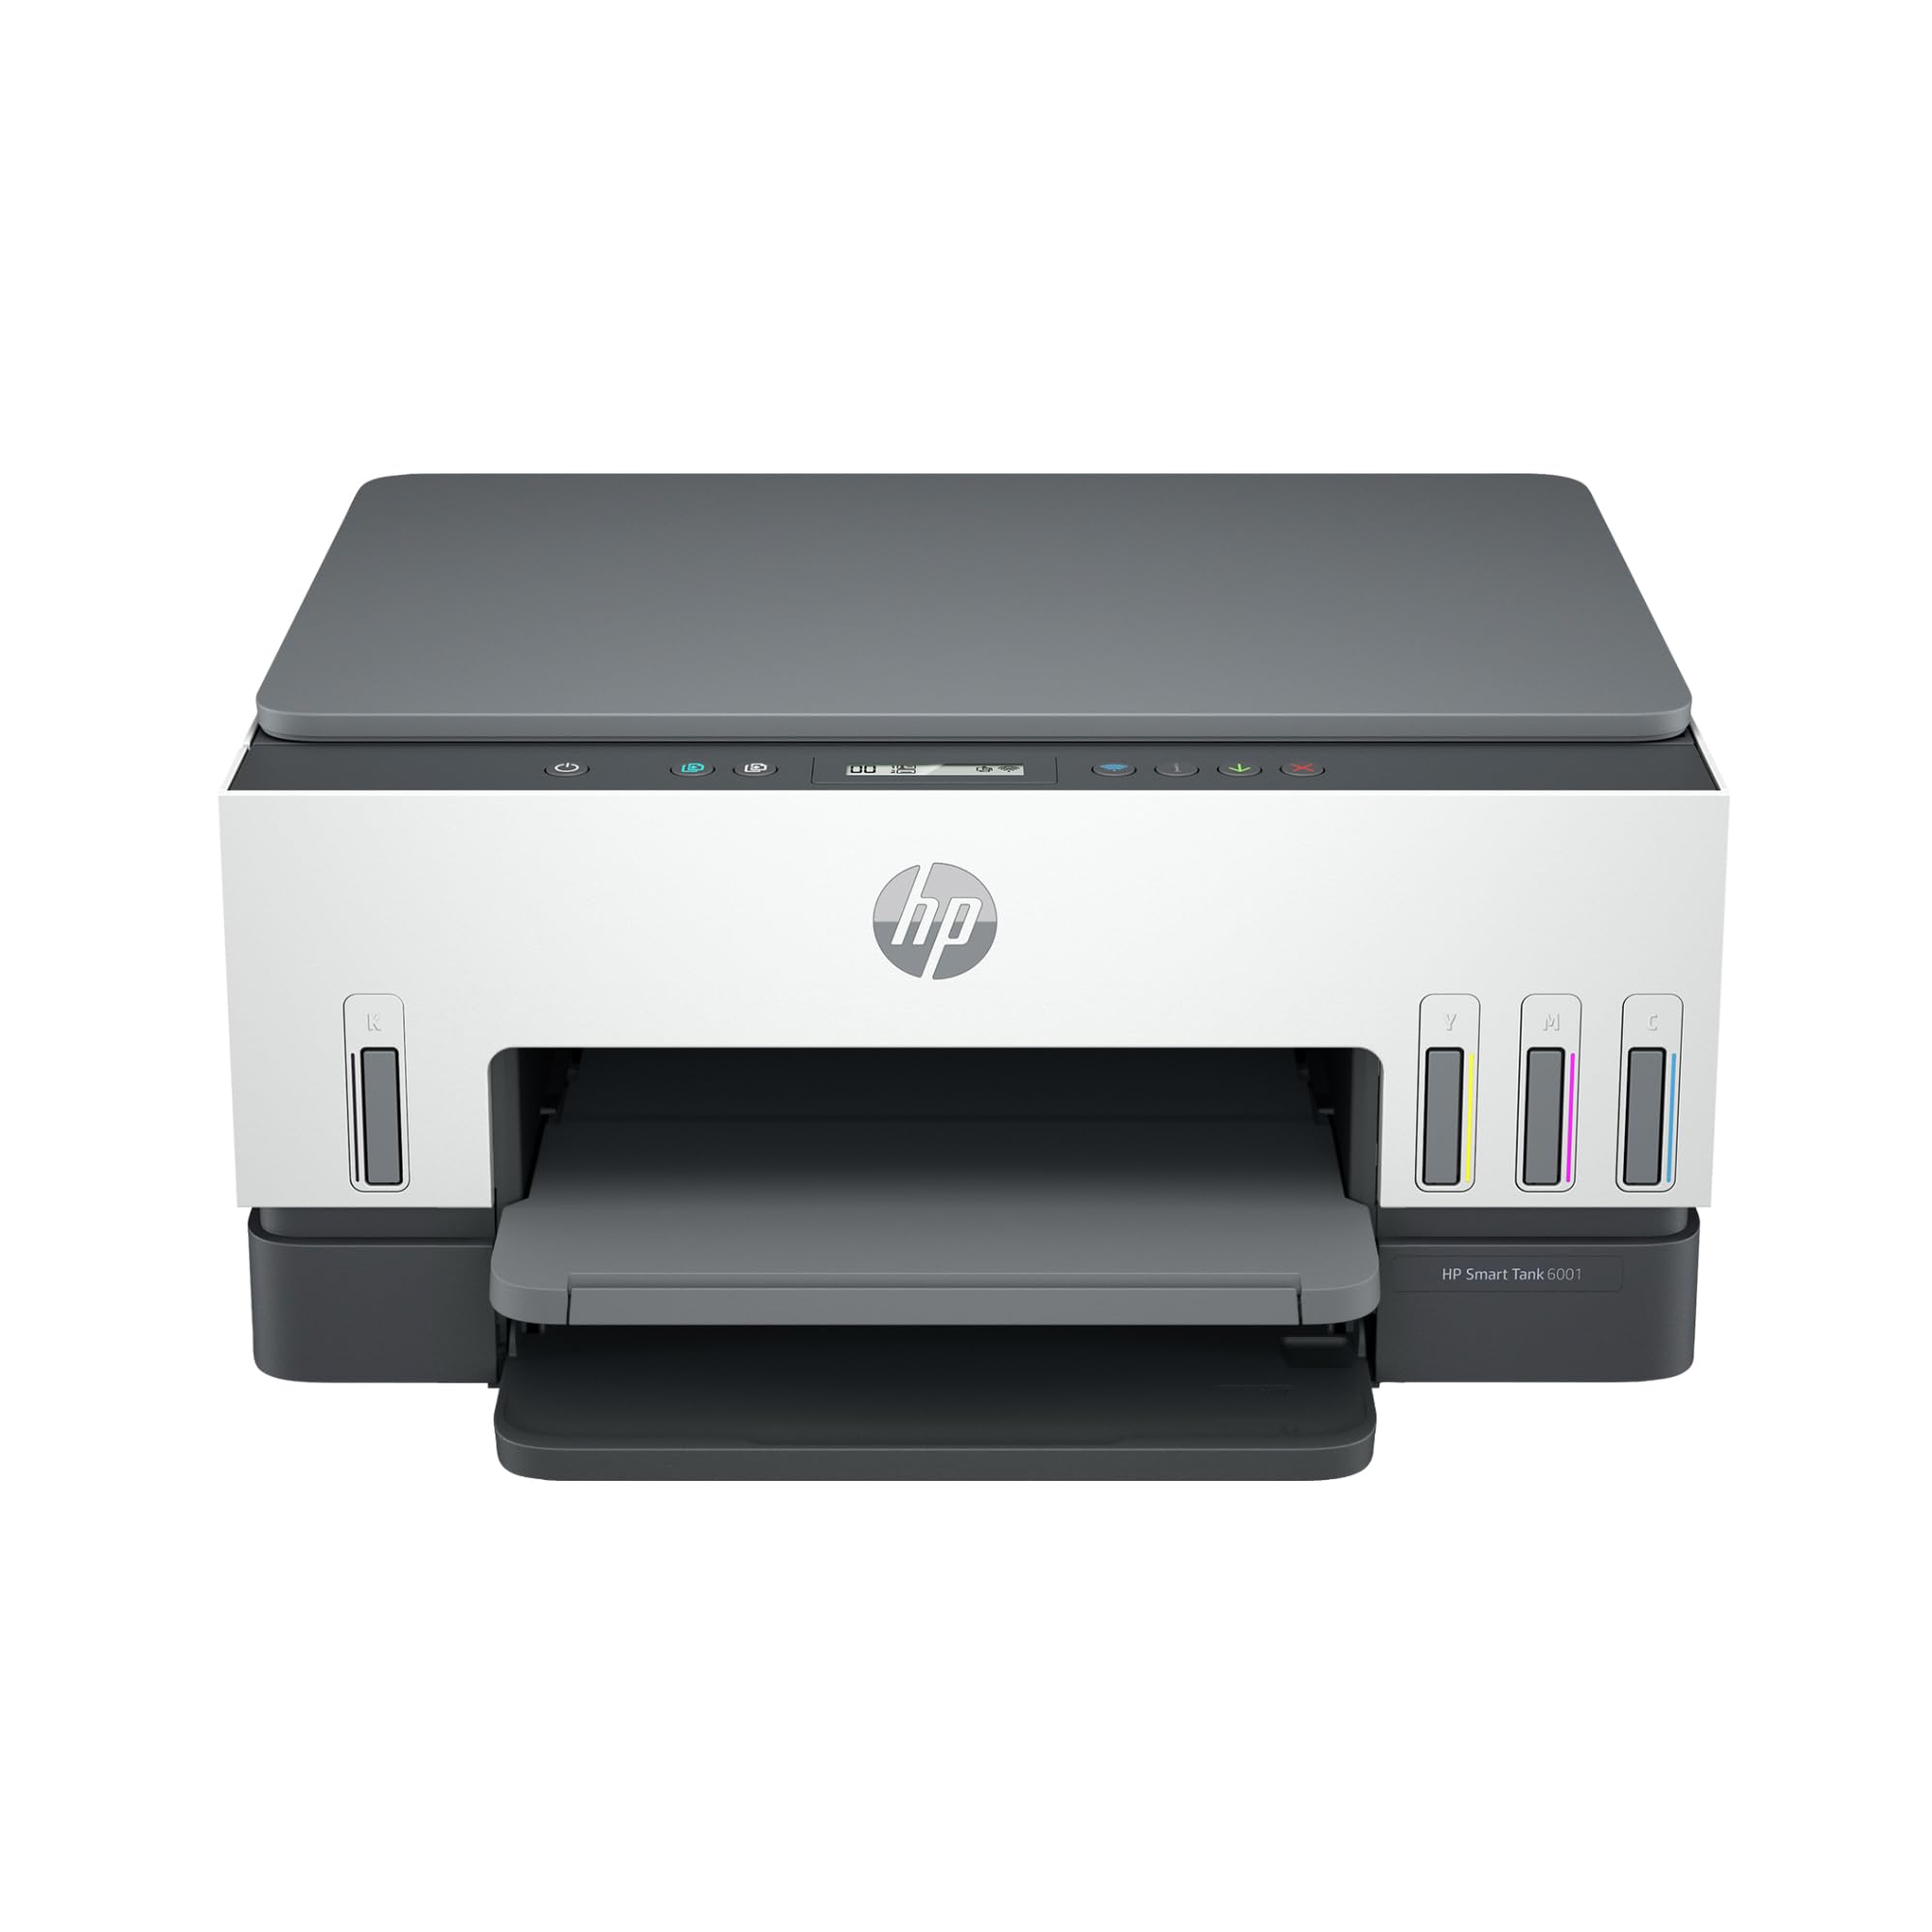 HP Smart Tank 6001 Wireless Cartridge-Free all in one printer, this ink tank printer comes with up to 2 years of ink included, with mobile print, scan, copy (2H0B9A)